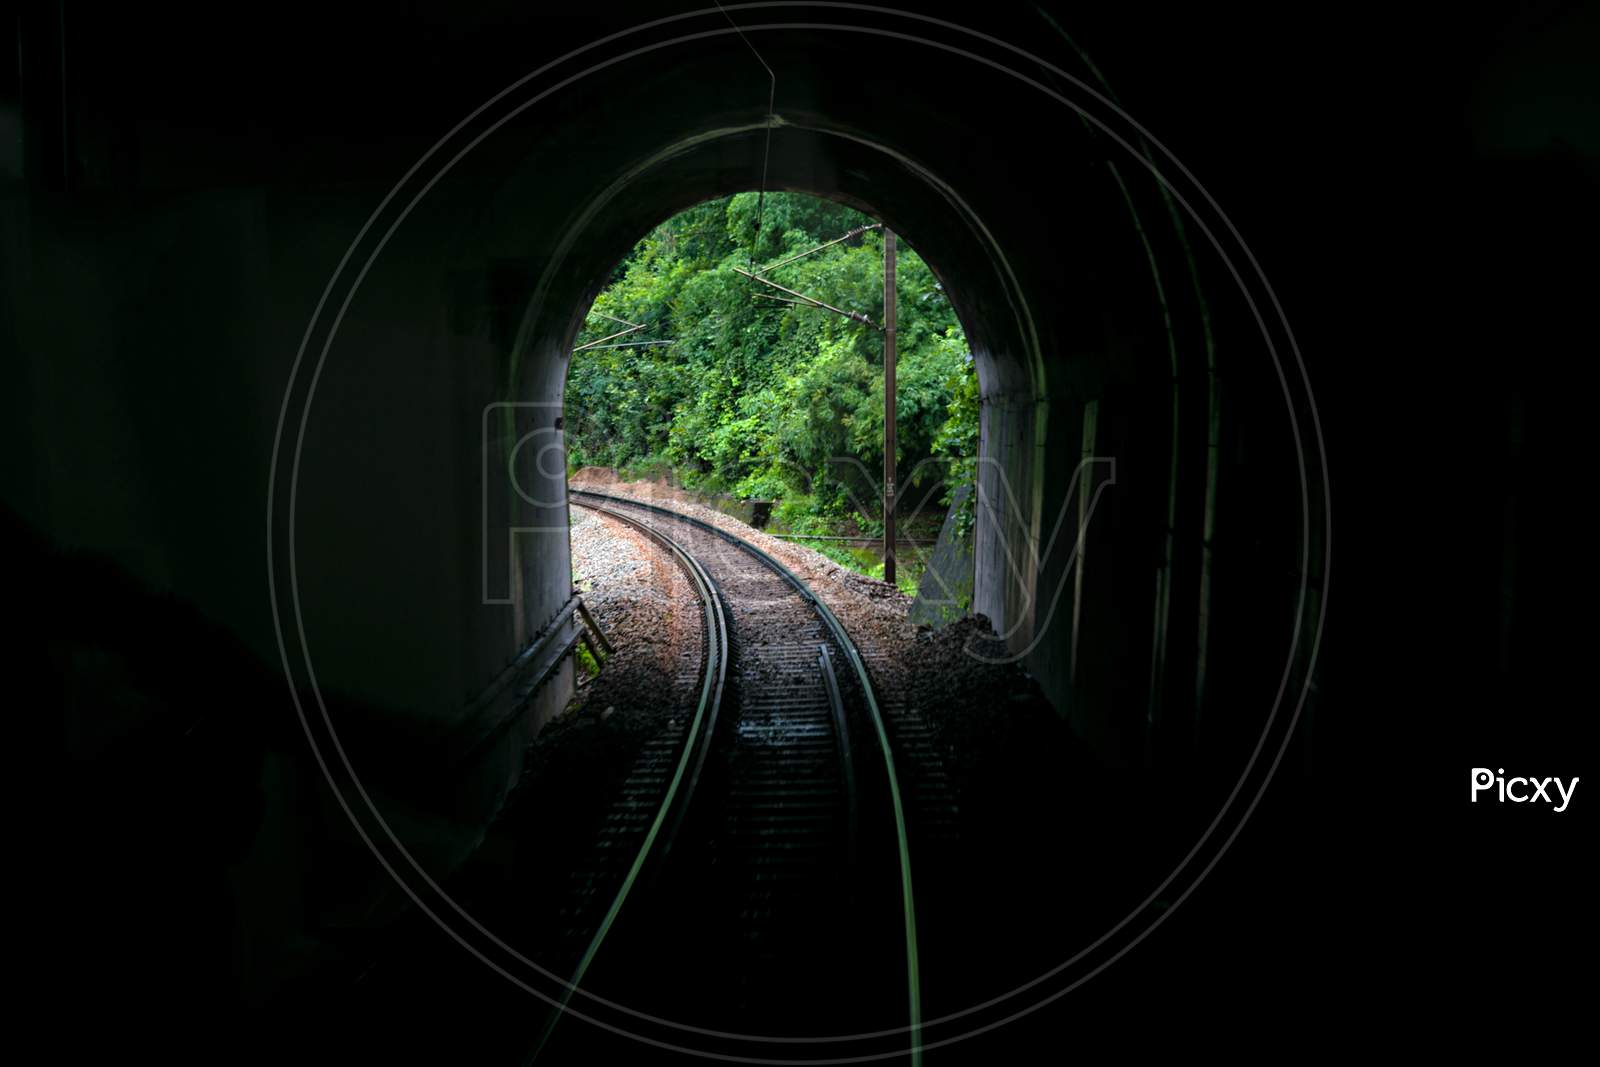 Image Taken From Vista-Dome Tourist Coach Of A Tunnel Portal With Railway Line.